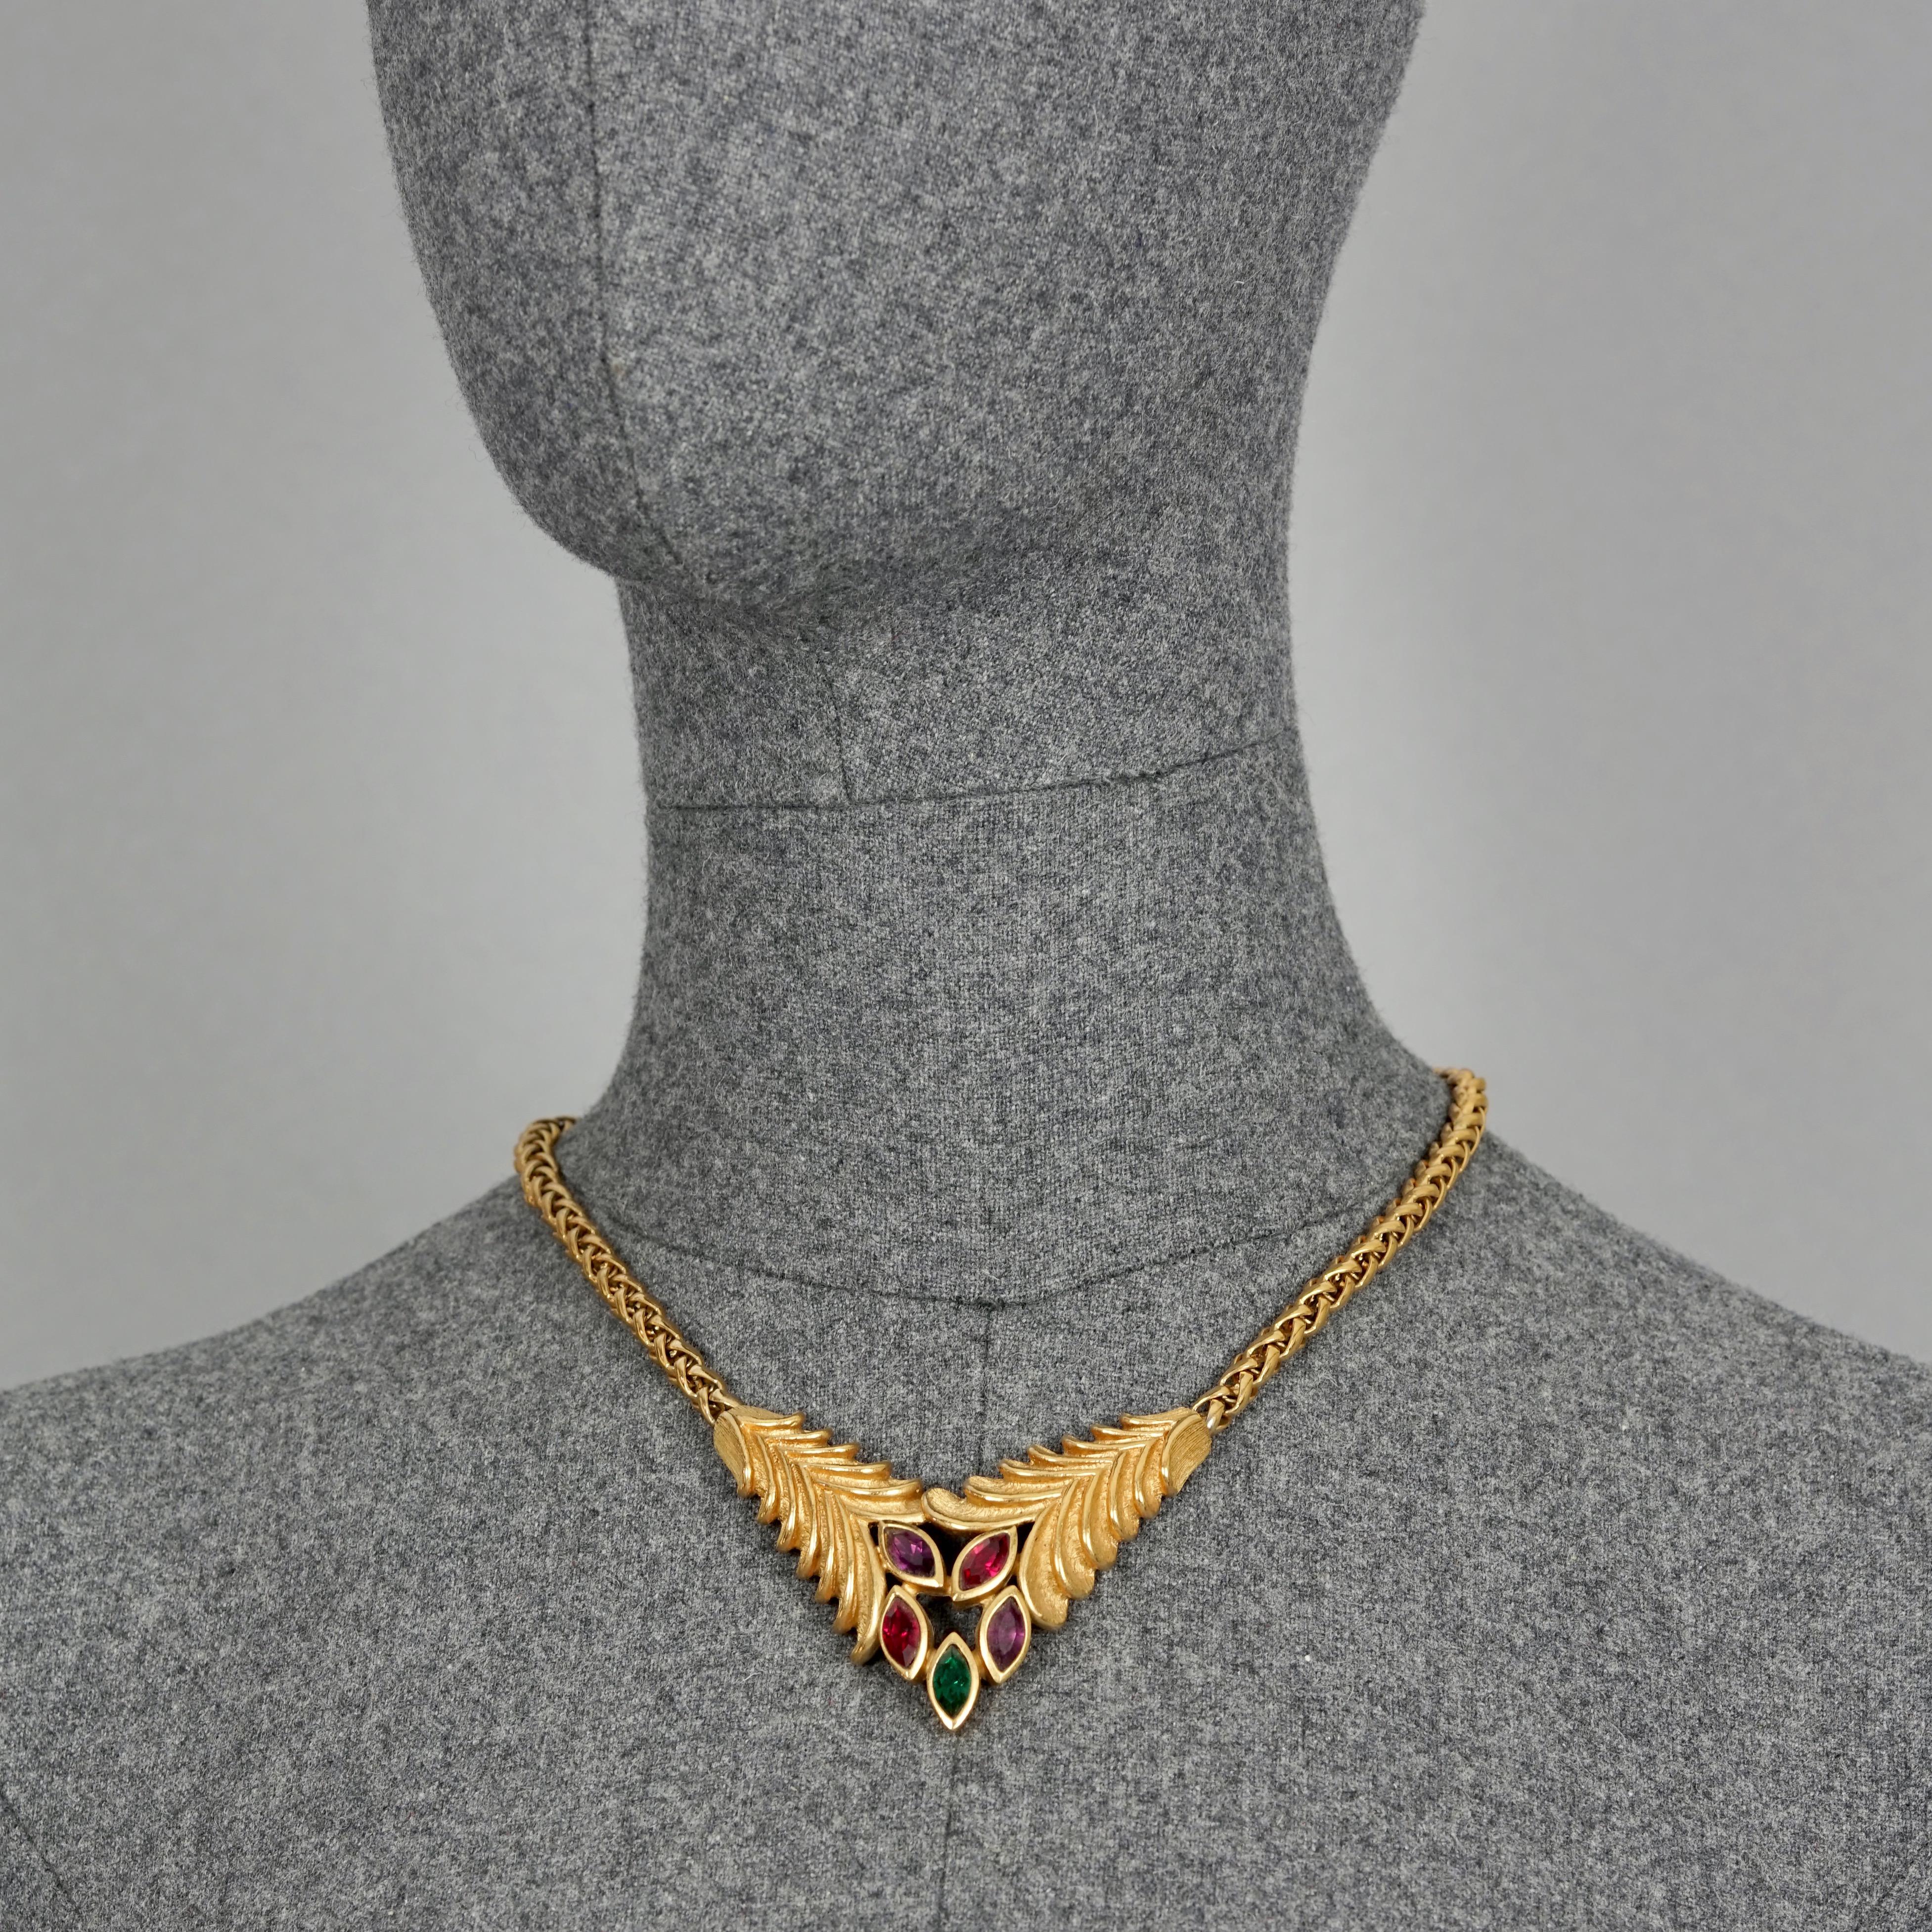 Vintage LANVIN Rhinestone Leaves Necklace

Measurements:
Height: 2.16 inches (5.5 cm)
Wearable Length: 15.75 inches to 17.12 cm (40 cm to 43.5 cm)

Features:
- 100% Authentic LANVIN.
- Jewelled leaves centrepiece.
- Gold tone hardware.
- Box clasp